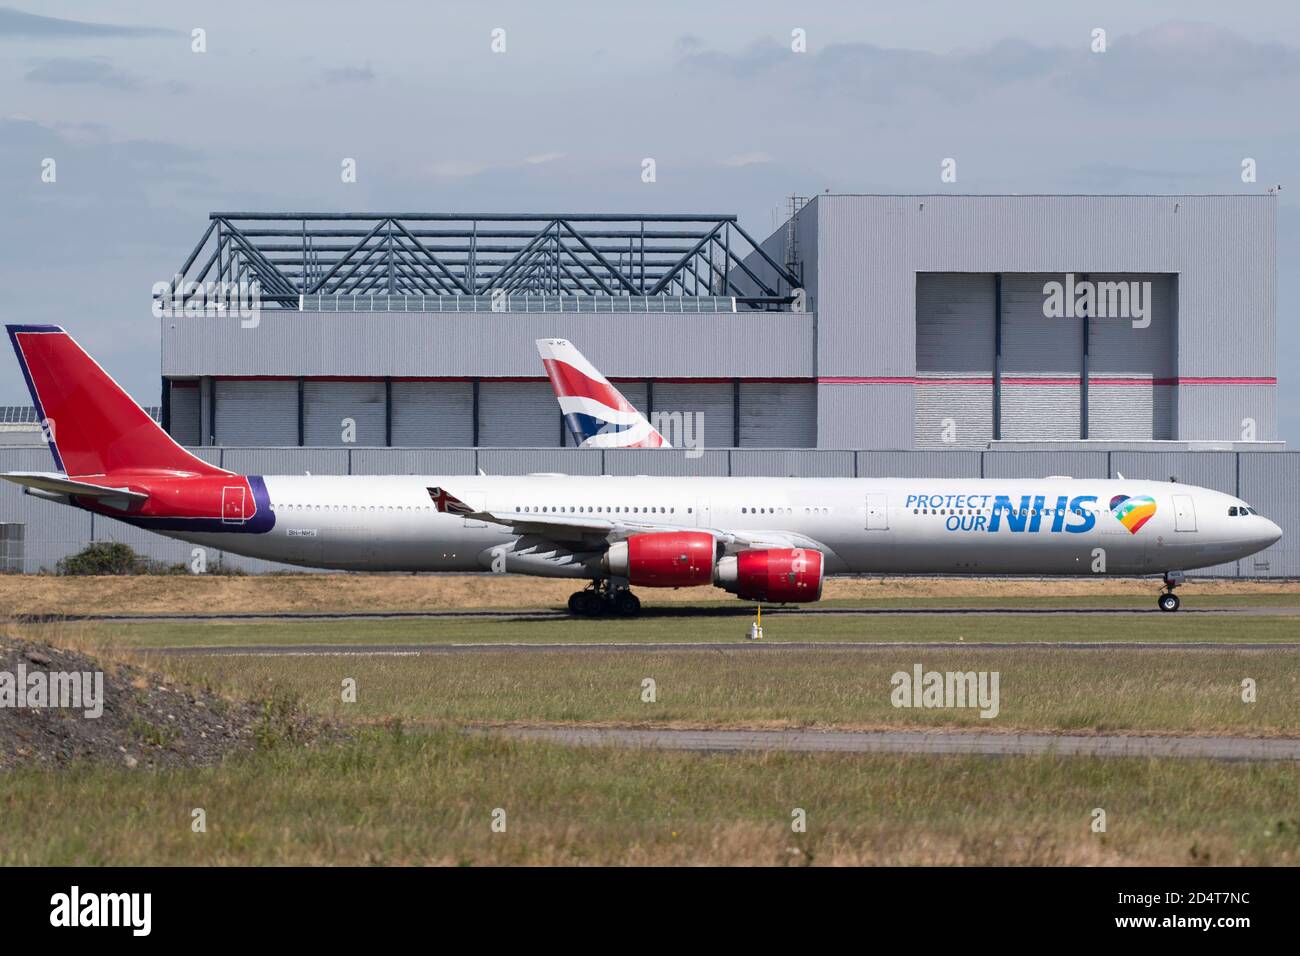 An Airbus A340-600 aircraft with ‘Protect our NHS’ branding takes off from Cardiff Airport on May 26, 2020 in Cardiff, United Kingdom Stock Photo